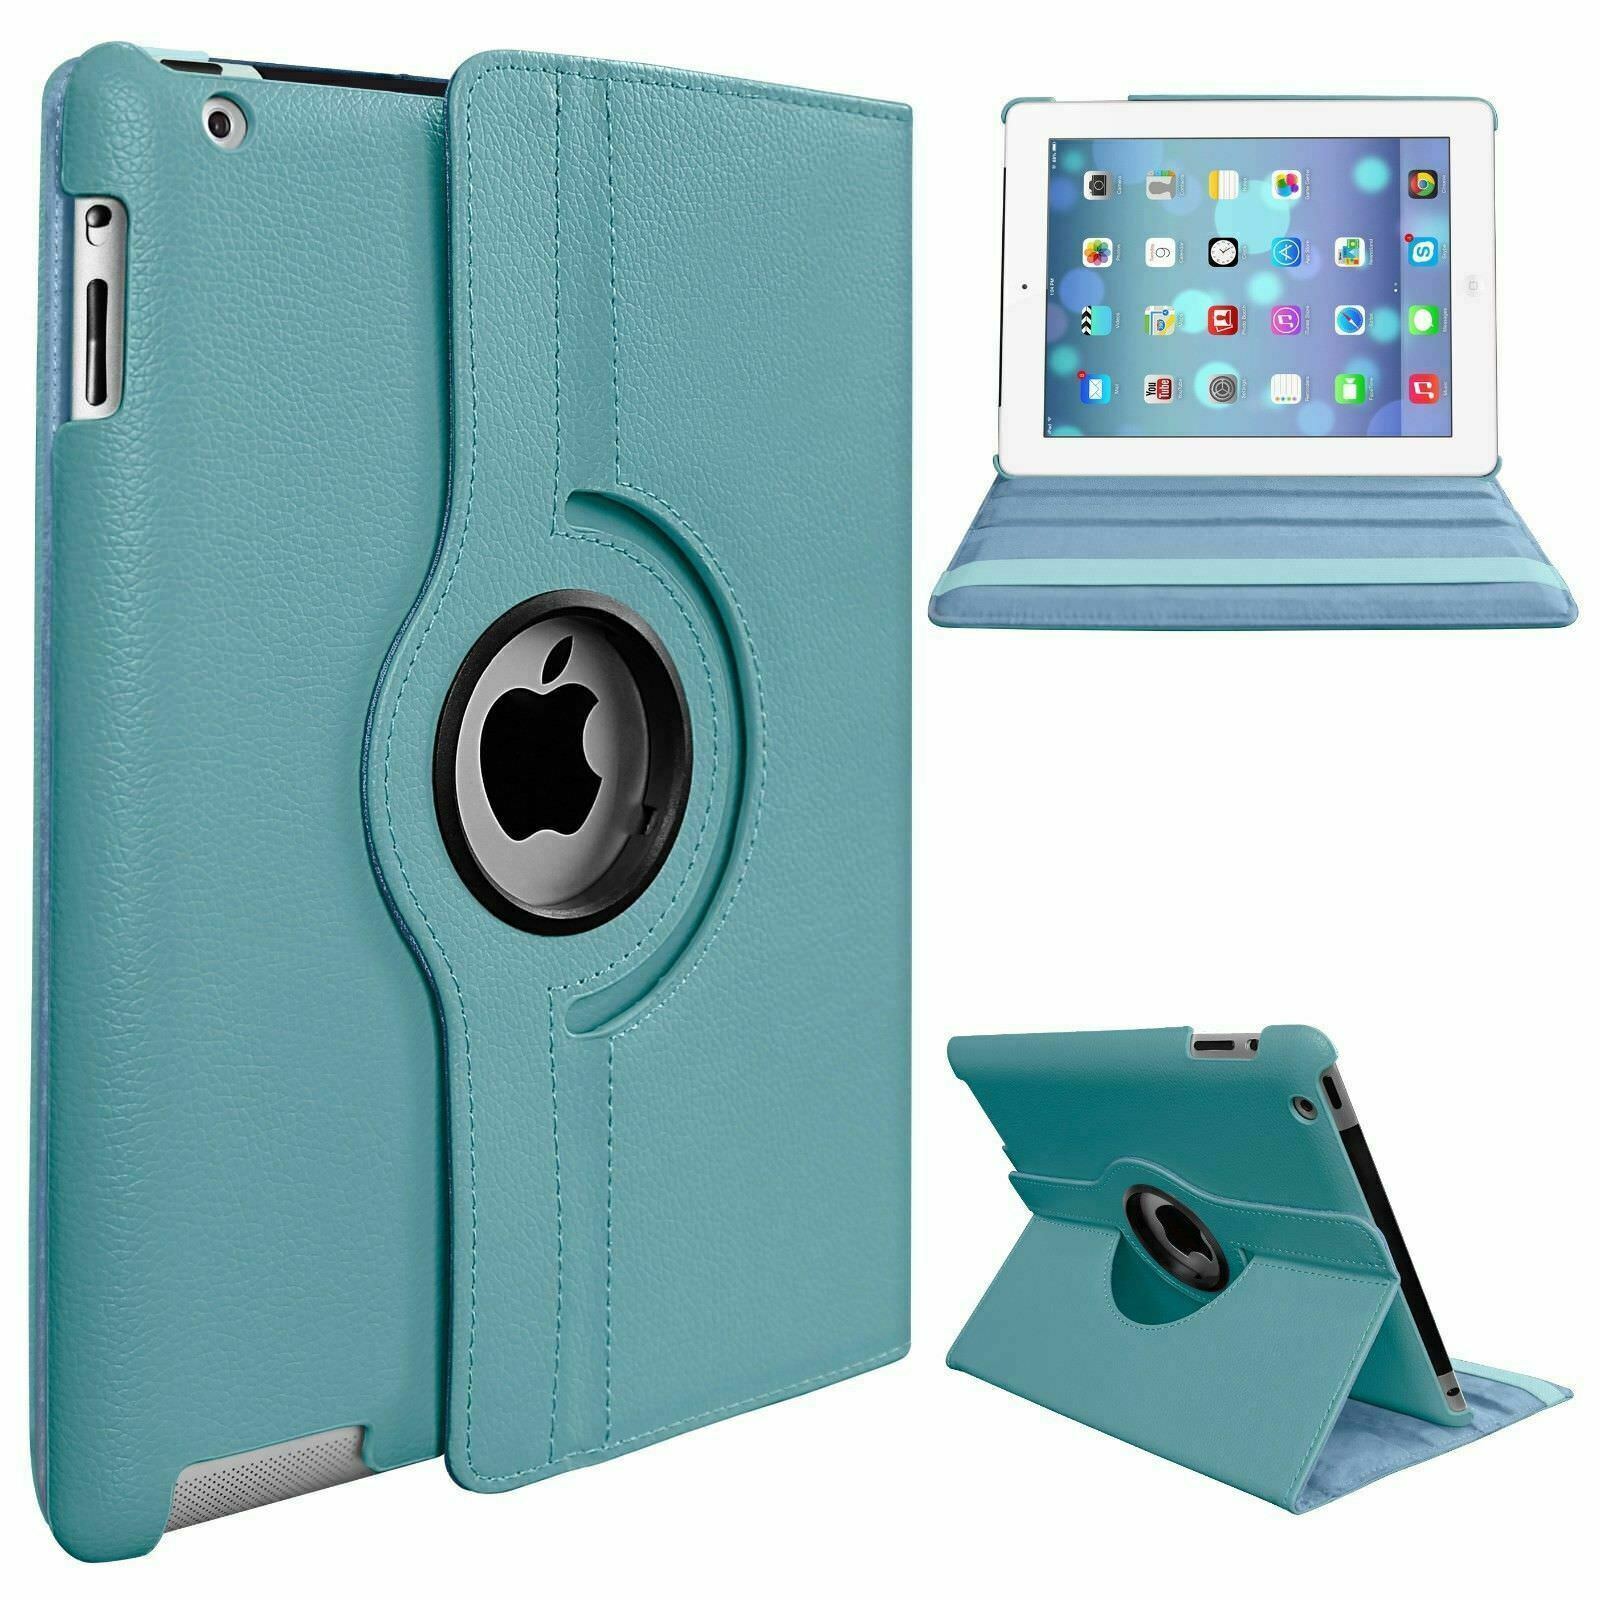 Leather 360 Rotating Smart Case Cover Apple iPad 10.5" Air 3